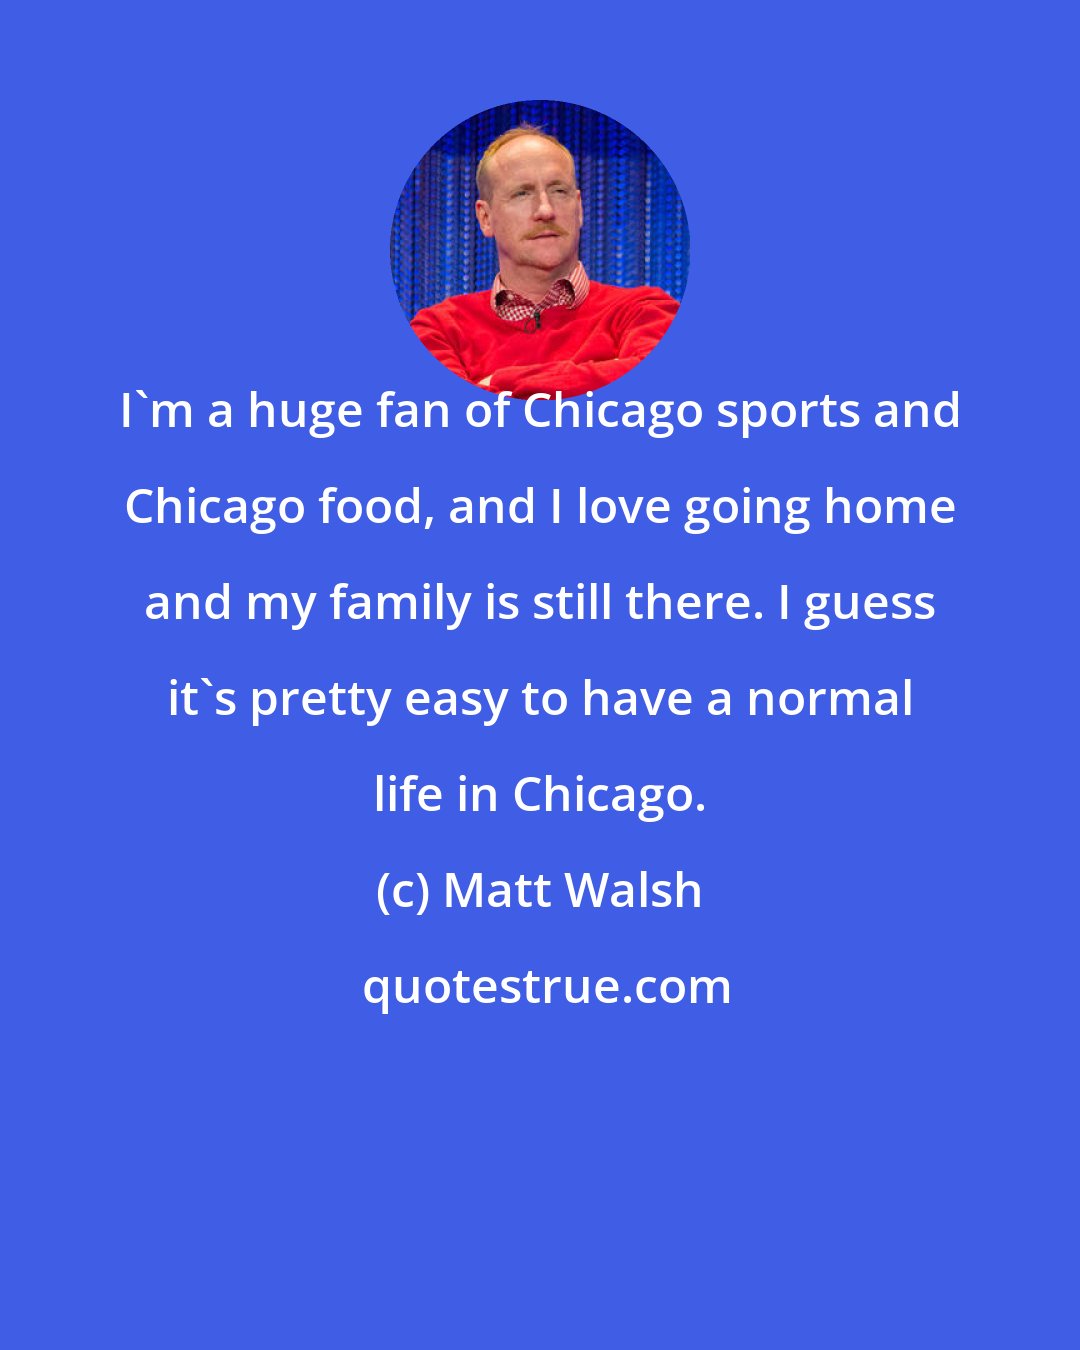 Matt Walsh: I'm a huge fan of Chicago sports and Chicago food, and I love going home and my family is still there. I guess it's pretty easy to have a normal life in Chicago.